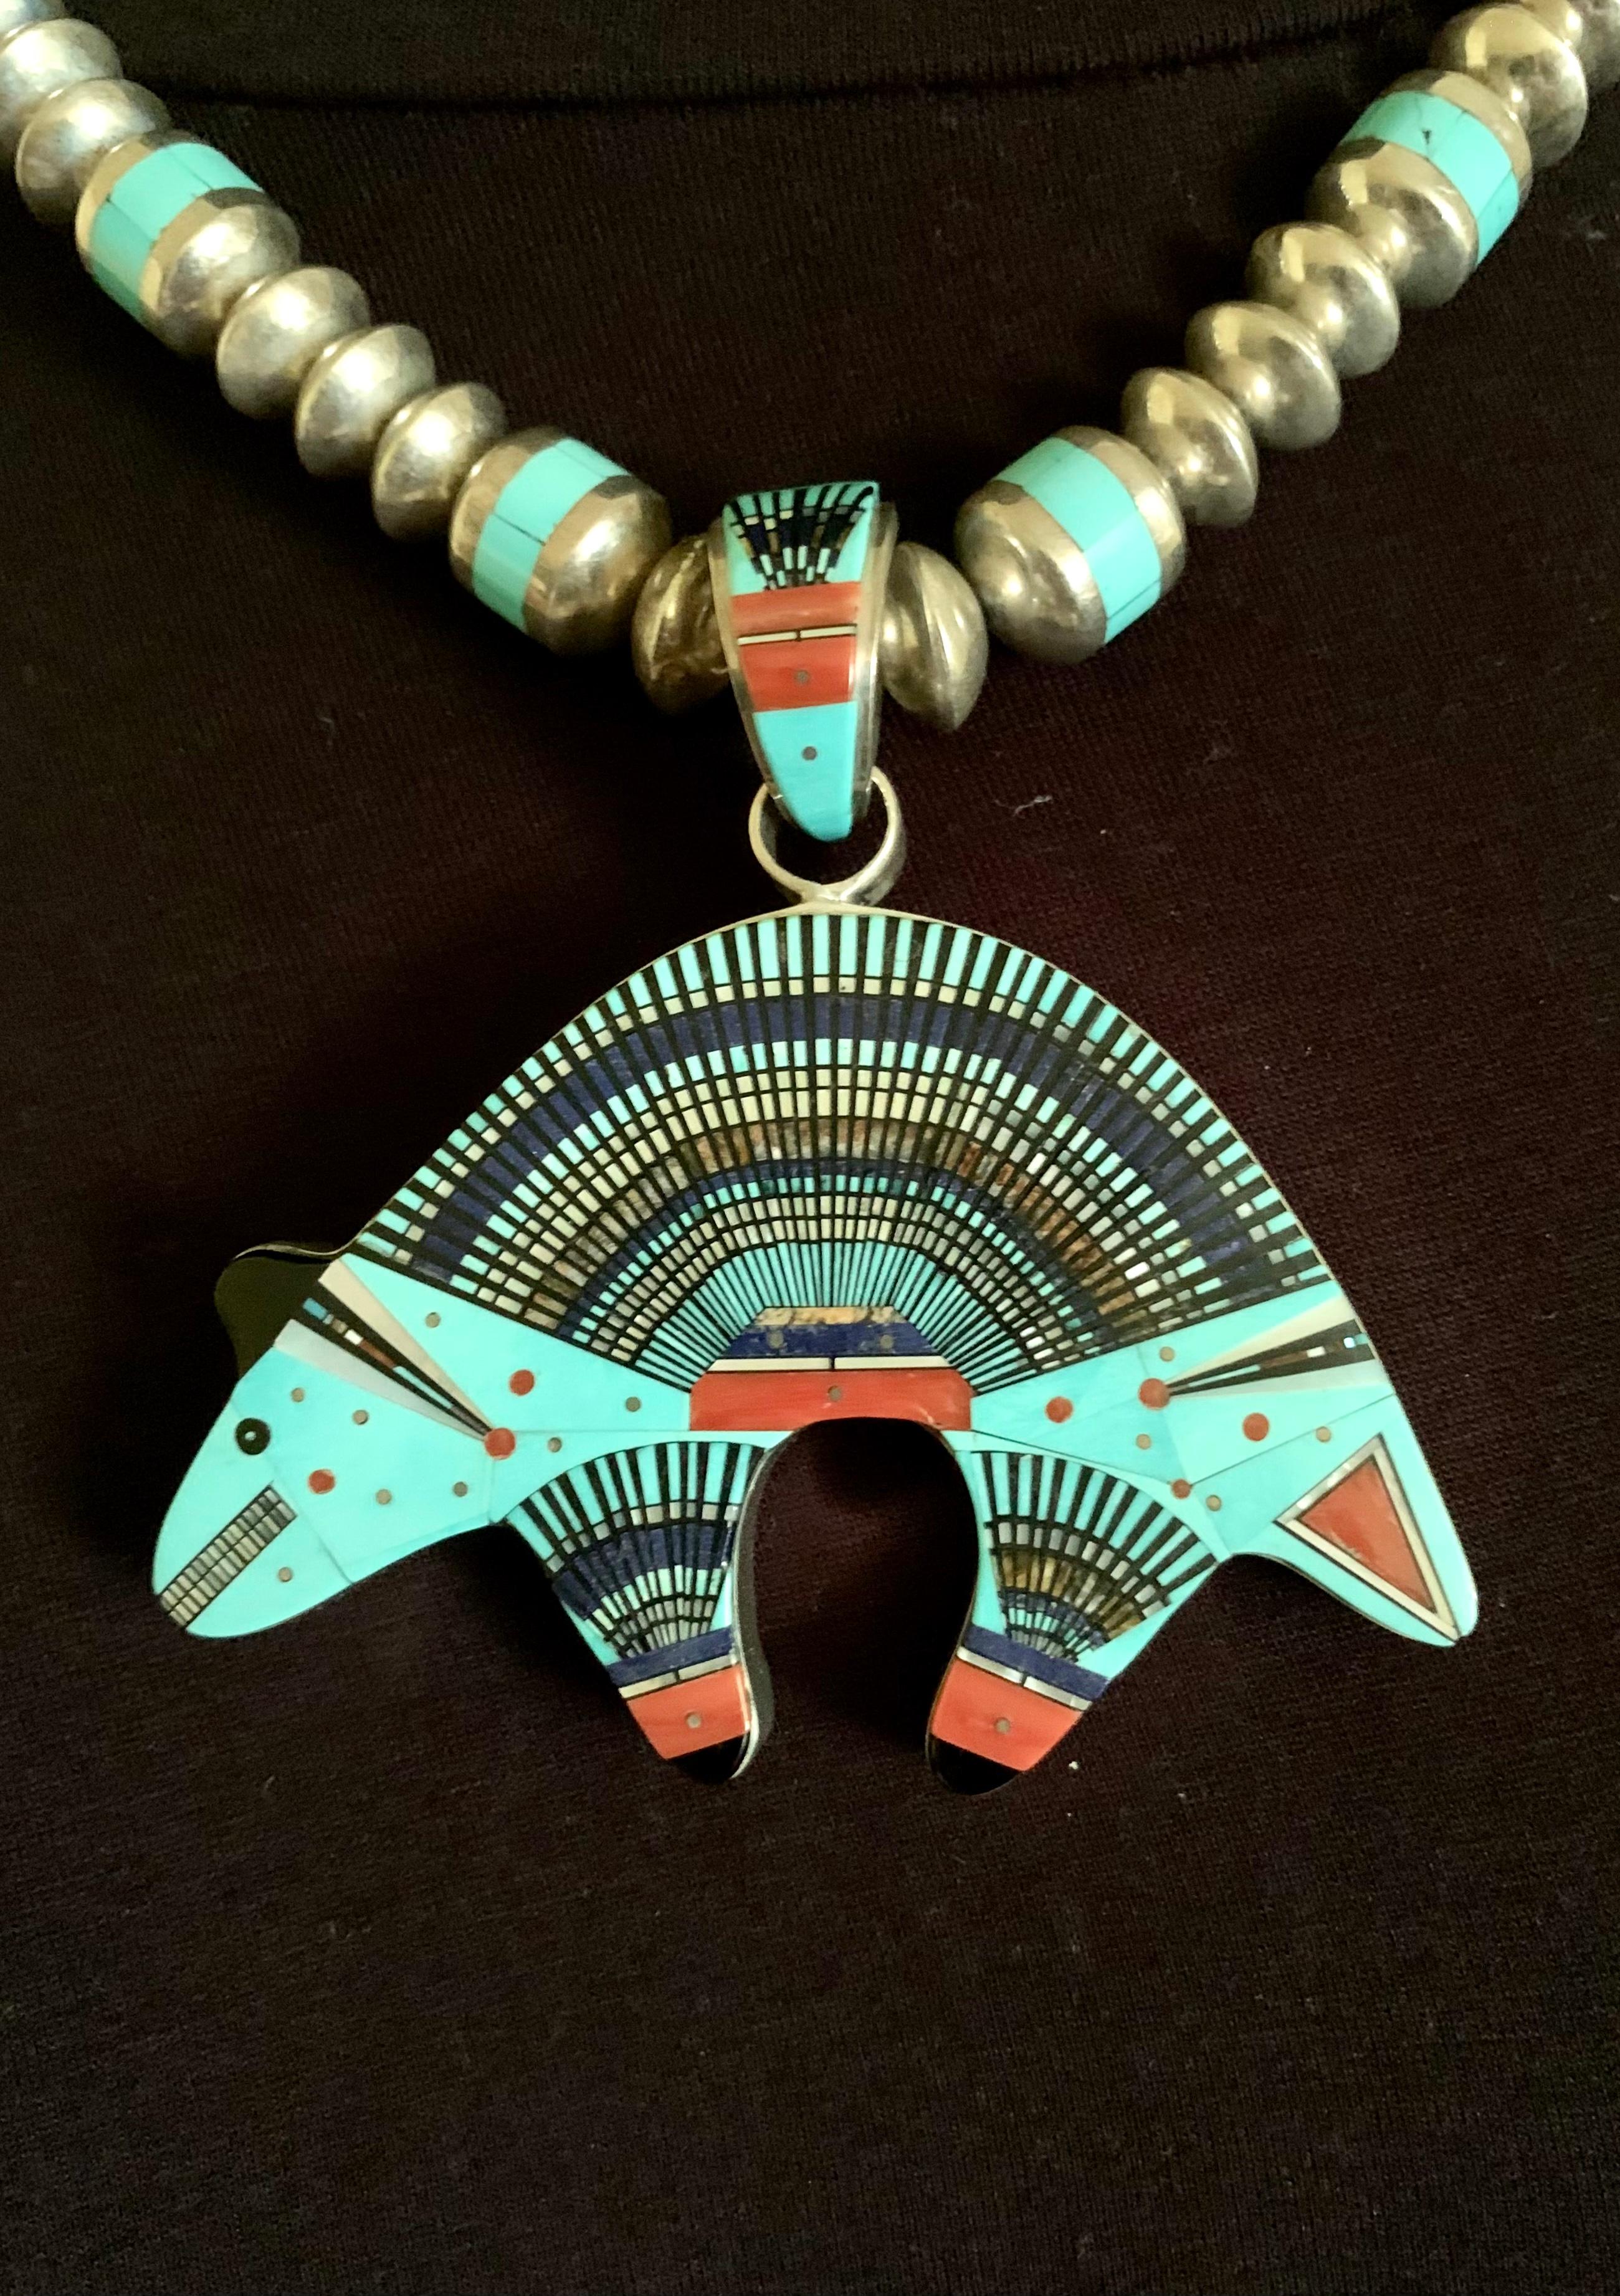 Large estate Navajo sterling silver, turquoise, coral, lapis lazuli, mother of pearl, onyx micro inlay large Sacred Bear necklace by Ervin Tsosie
20th Century
The bear is a sacred and powerful symbol in Navajo culture, symbolizing strength, wisdom